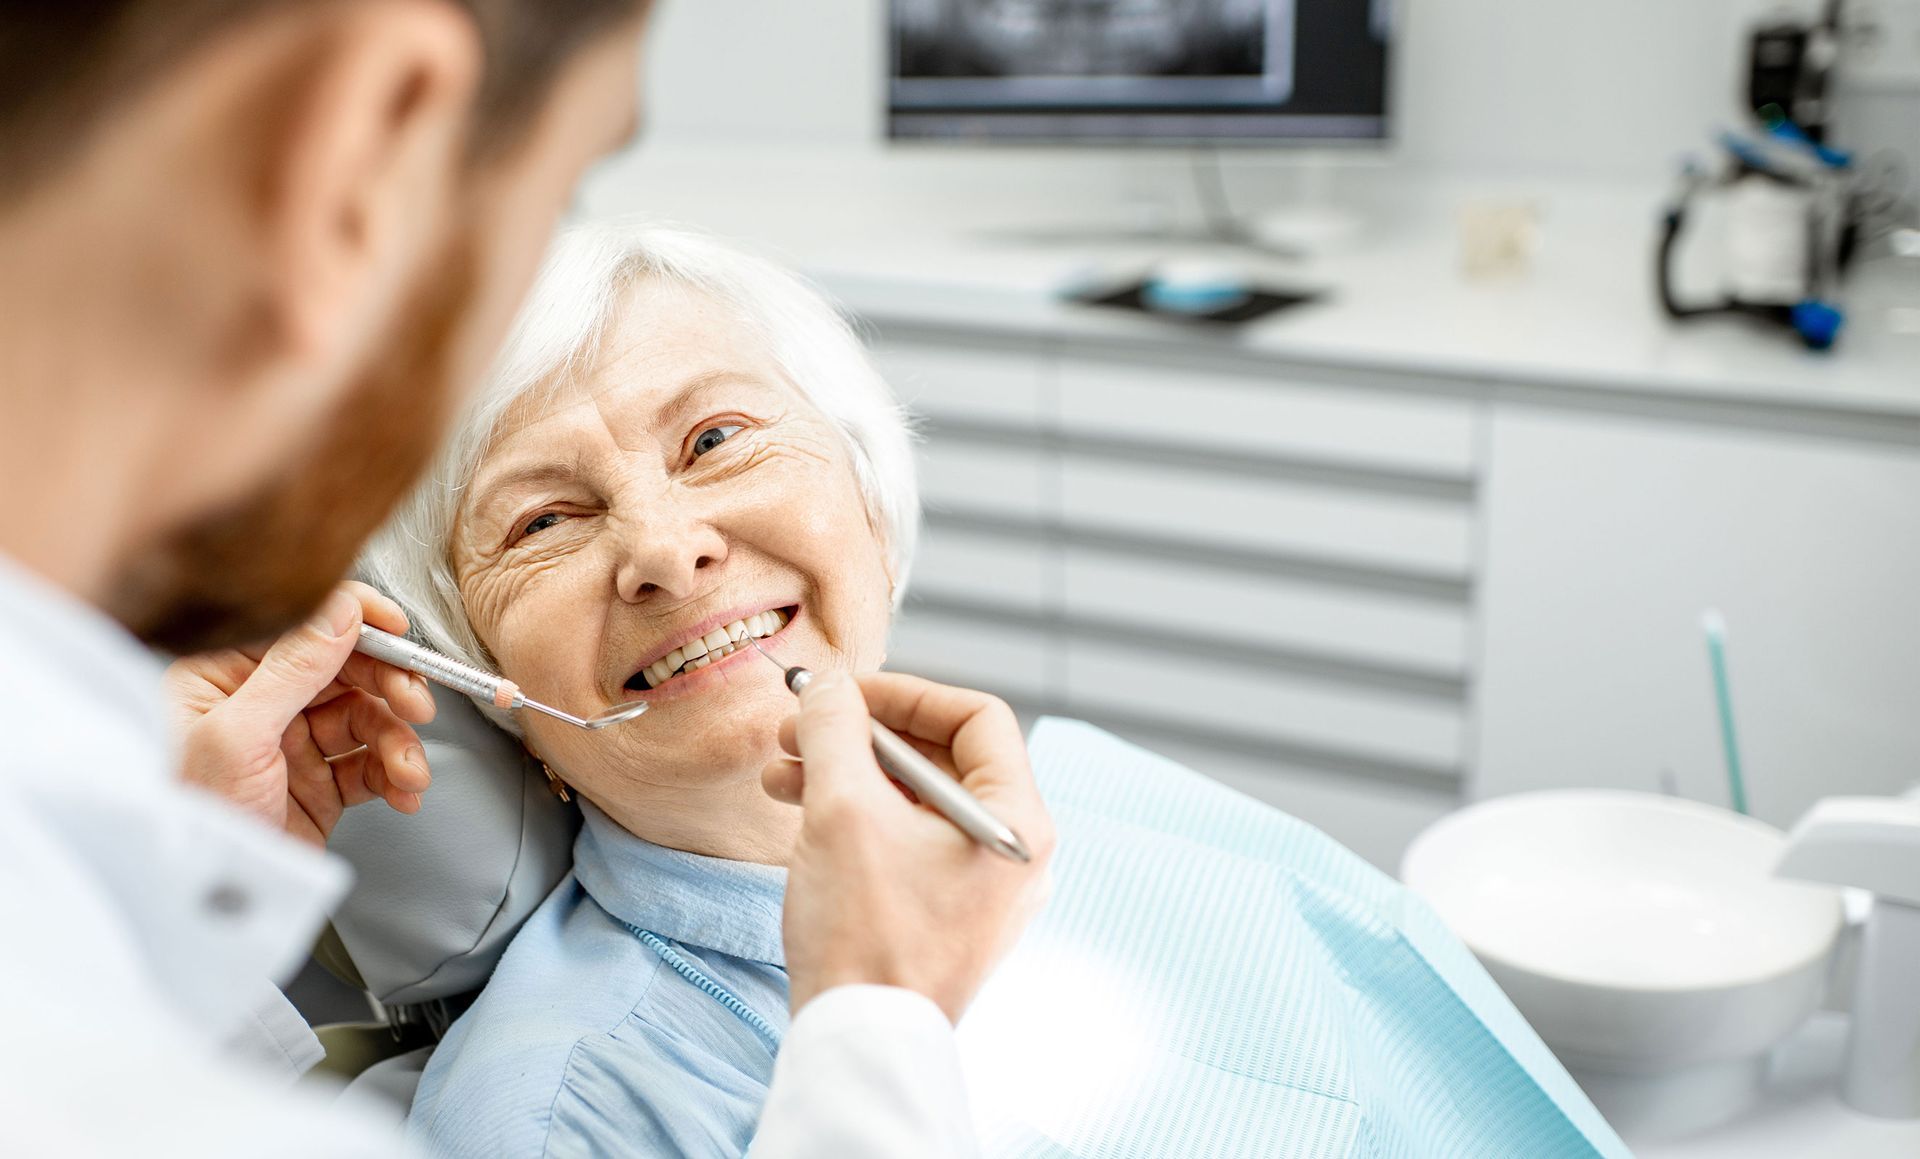 An elderly woman is sitting in a dental chair while a dentist examines her teeth.